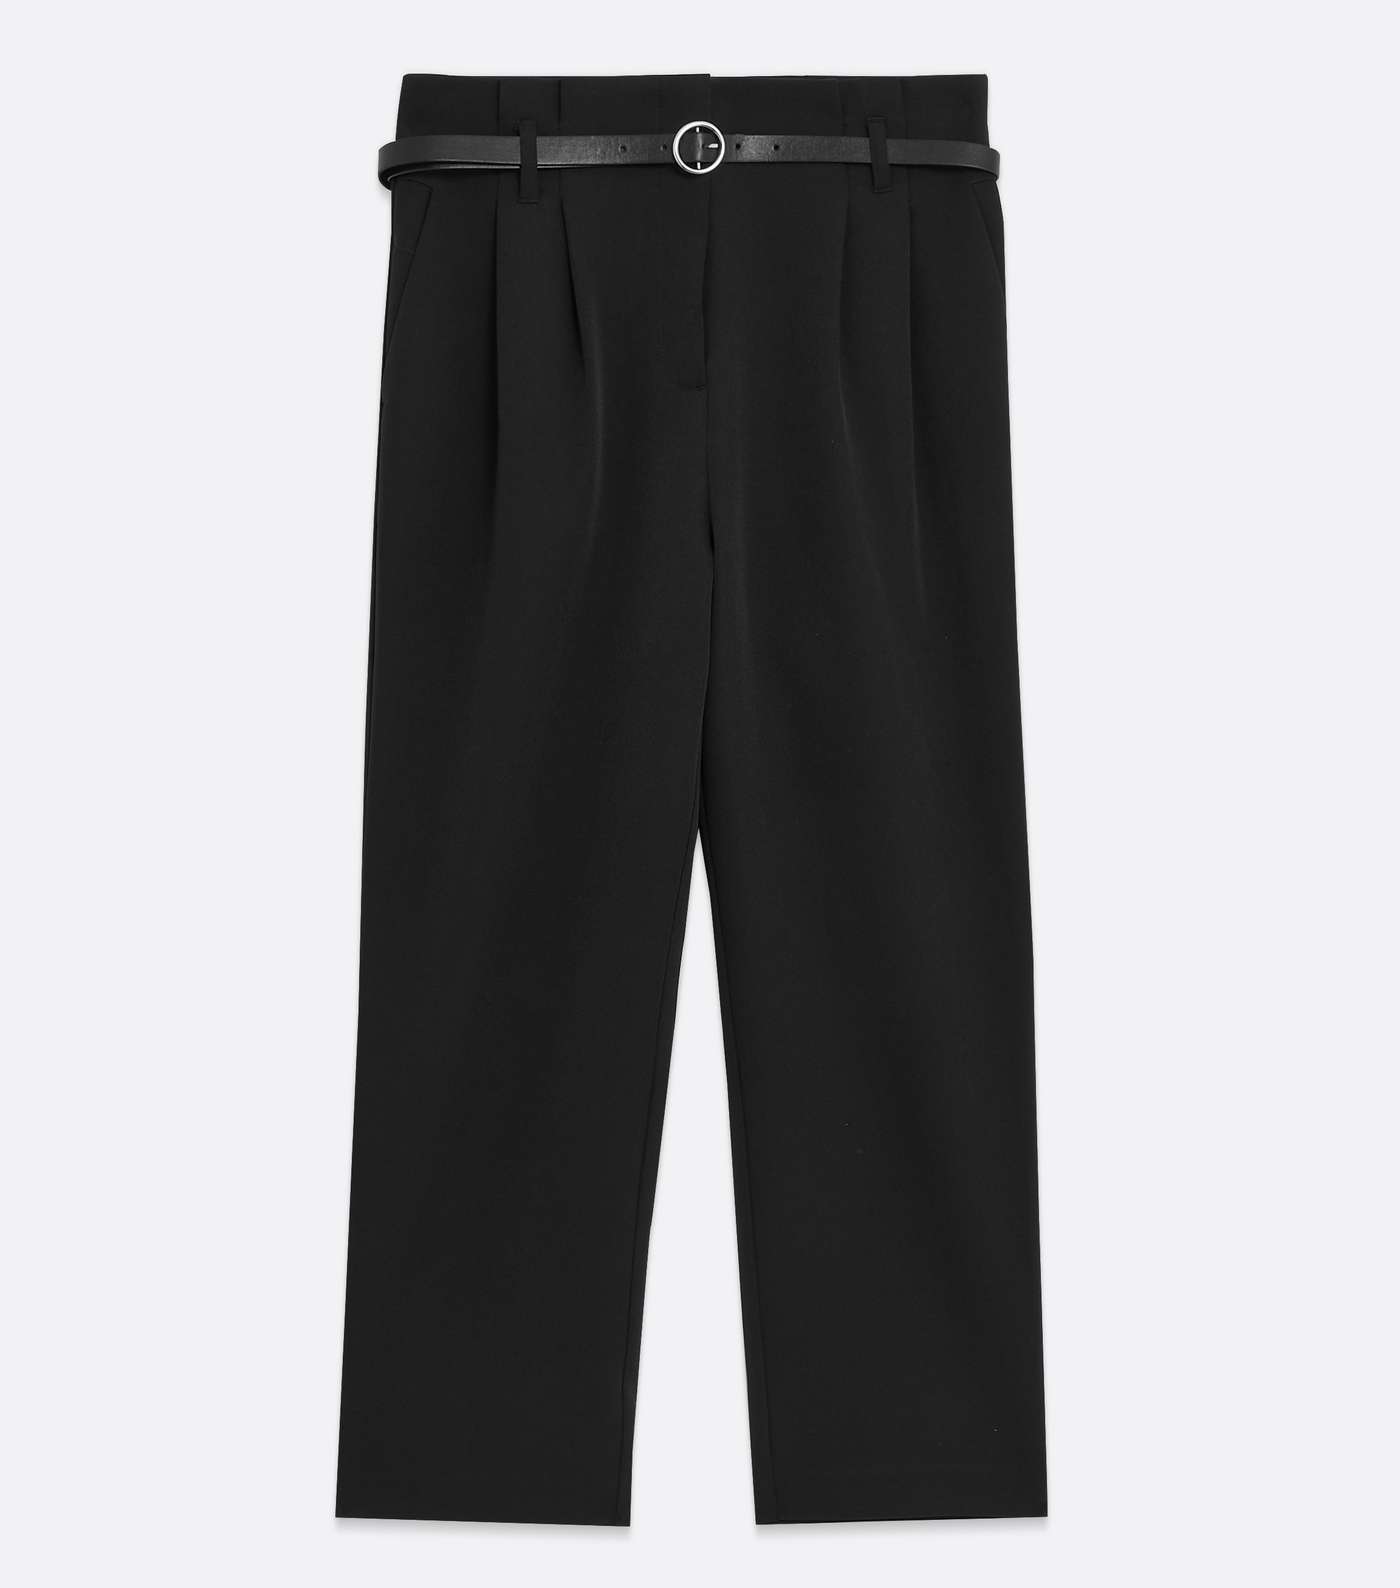 Petite Black Belted Trousers Image 5